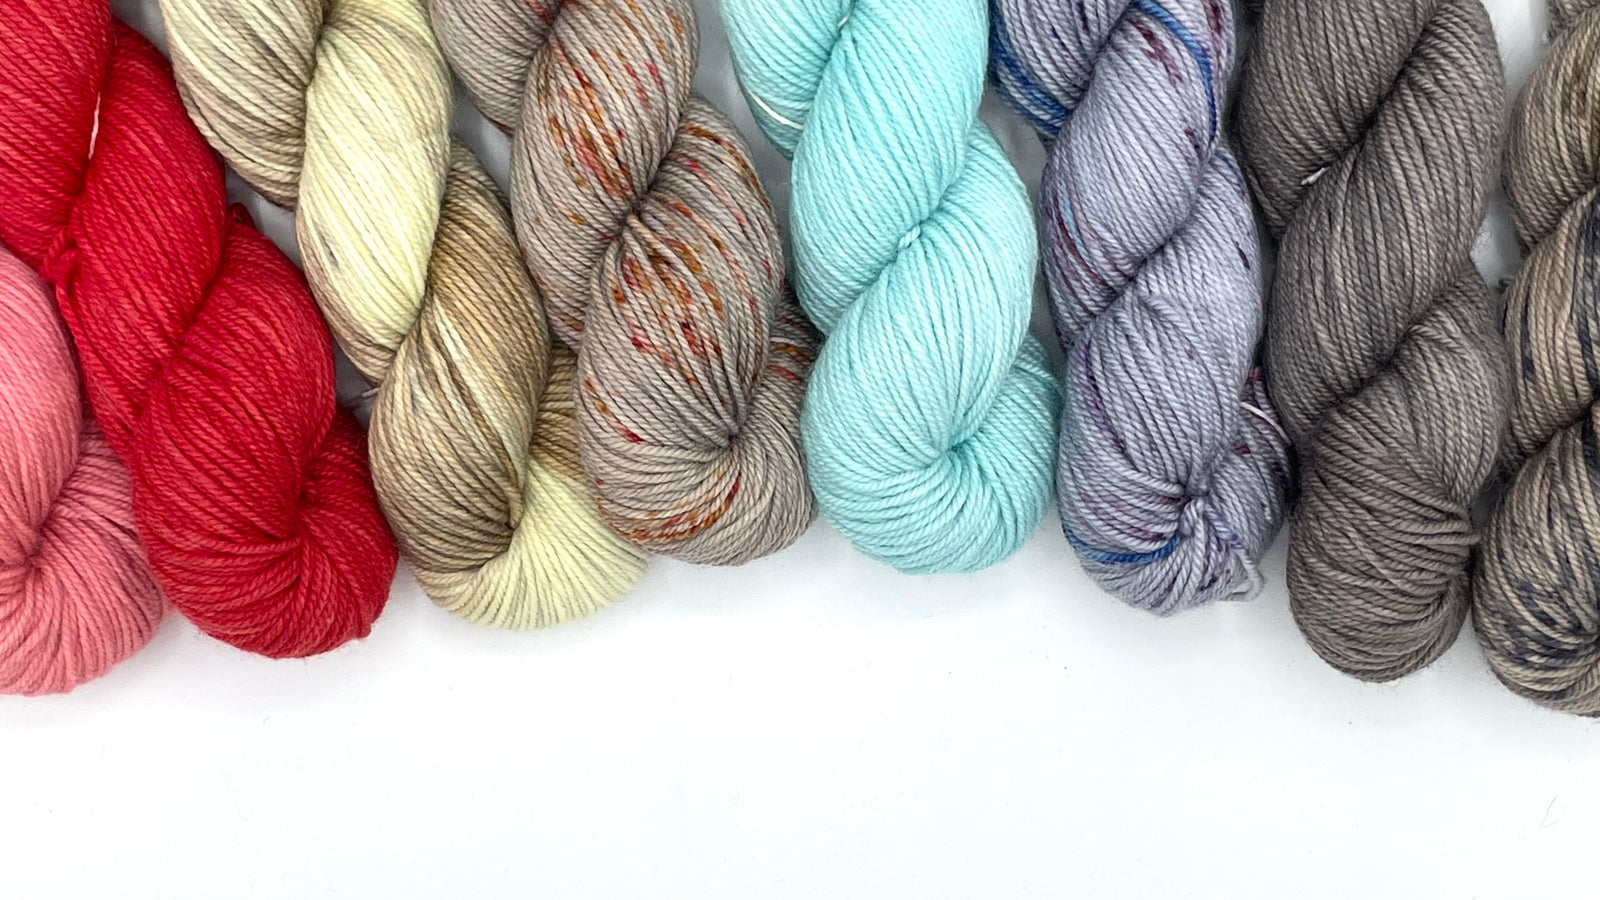 Natural Fibre Yarns for Hand Knitting and Crocheting - The Fibre Co